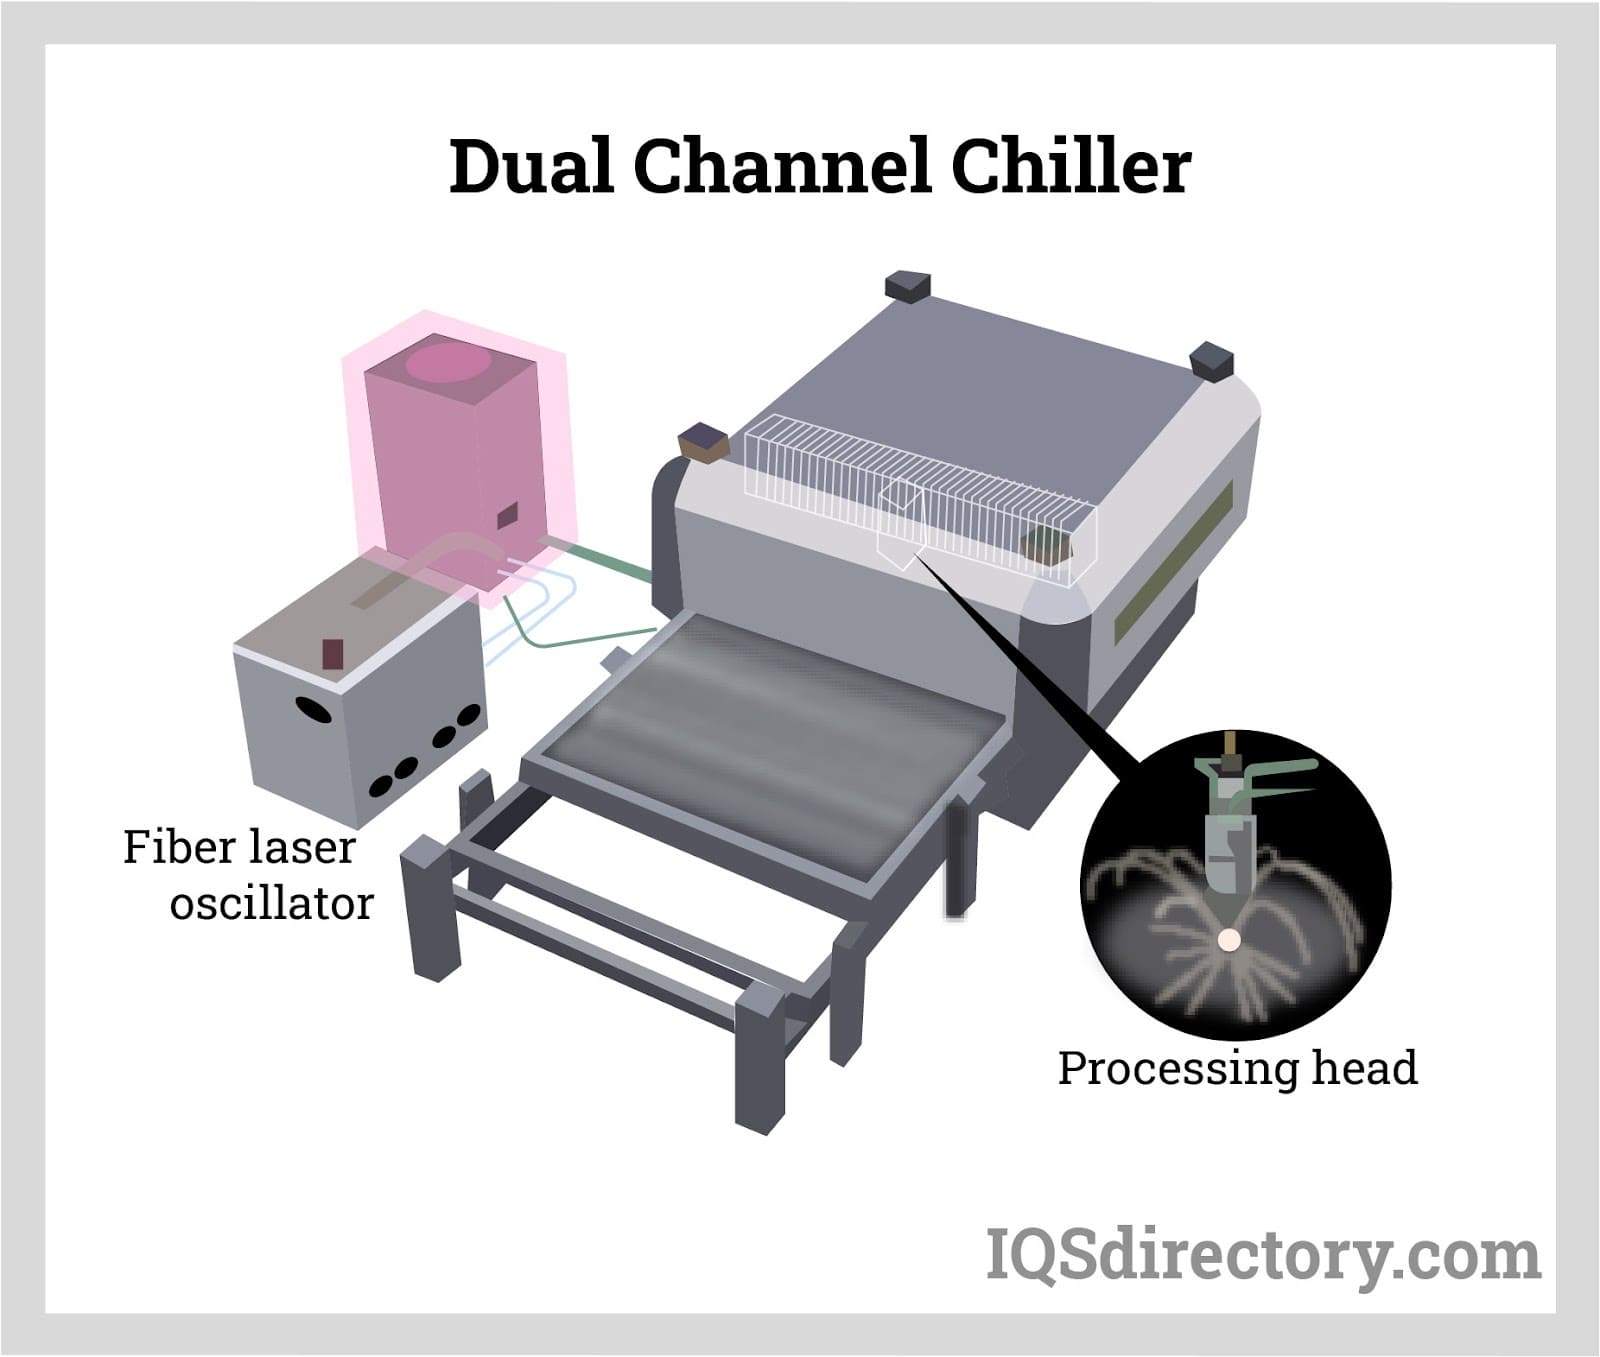 Dual Channel Chiller